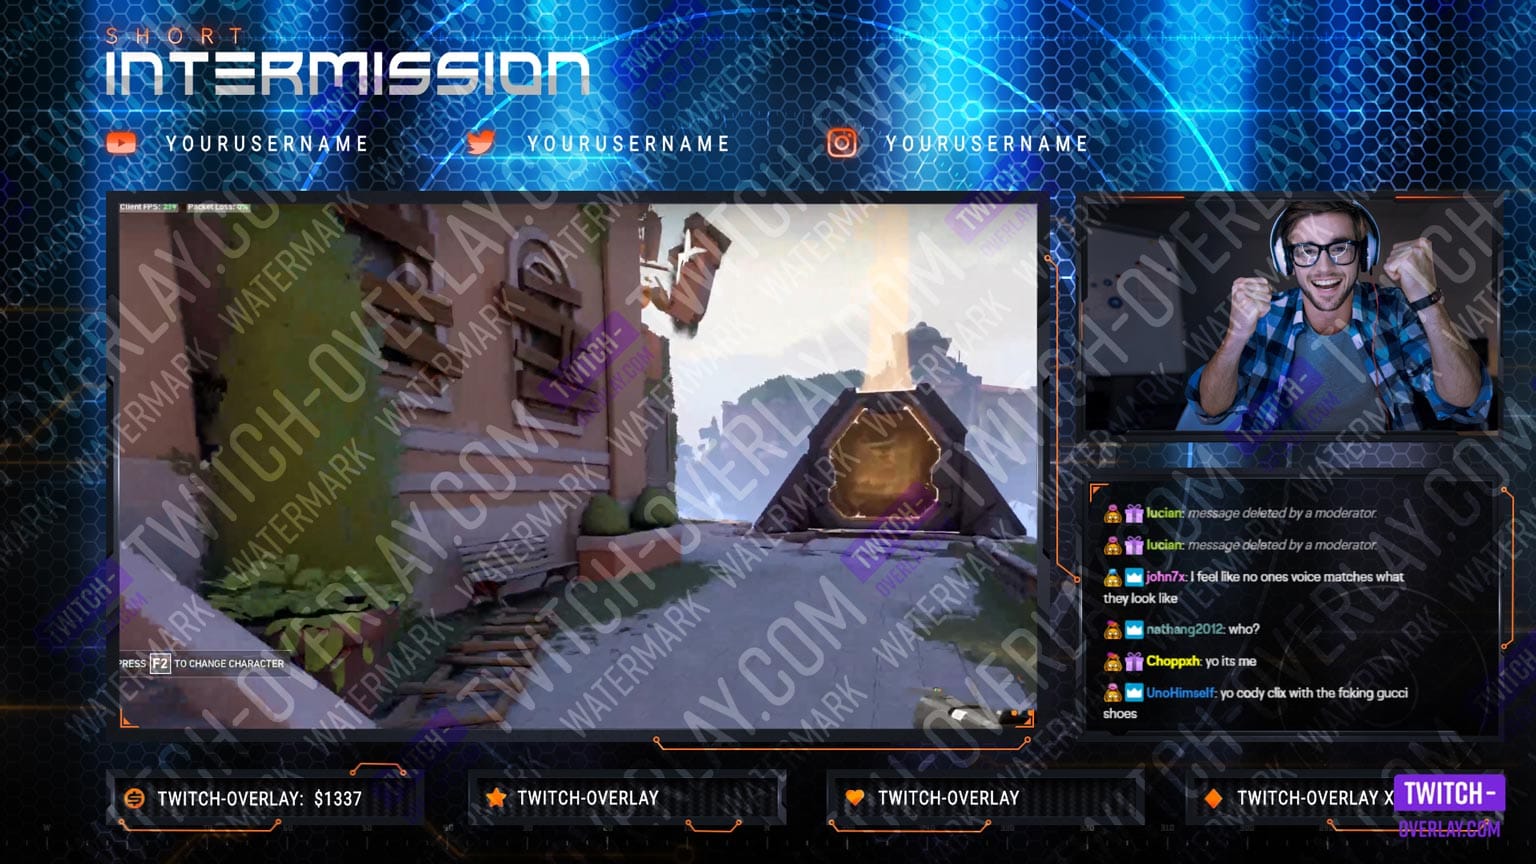 Intermission Screen from the Cyber Assault Stream Bundle for Twitch, Facebook and YouTube Streams